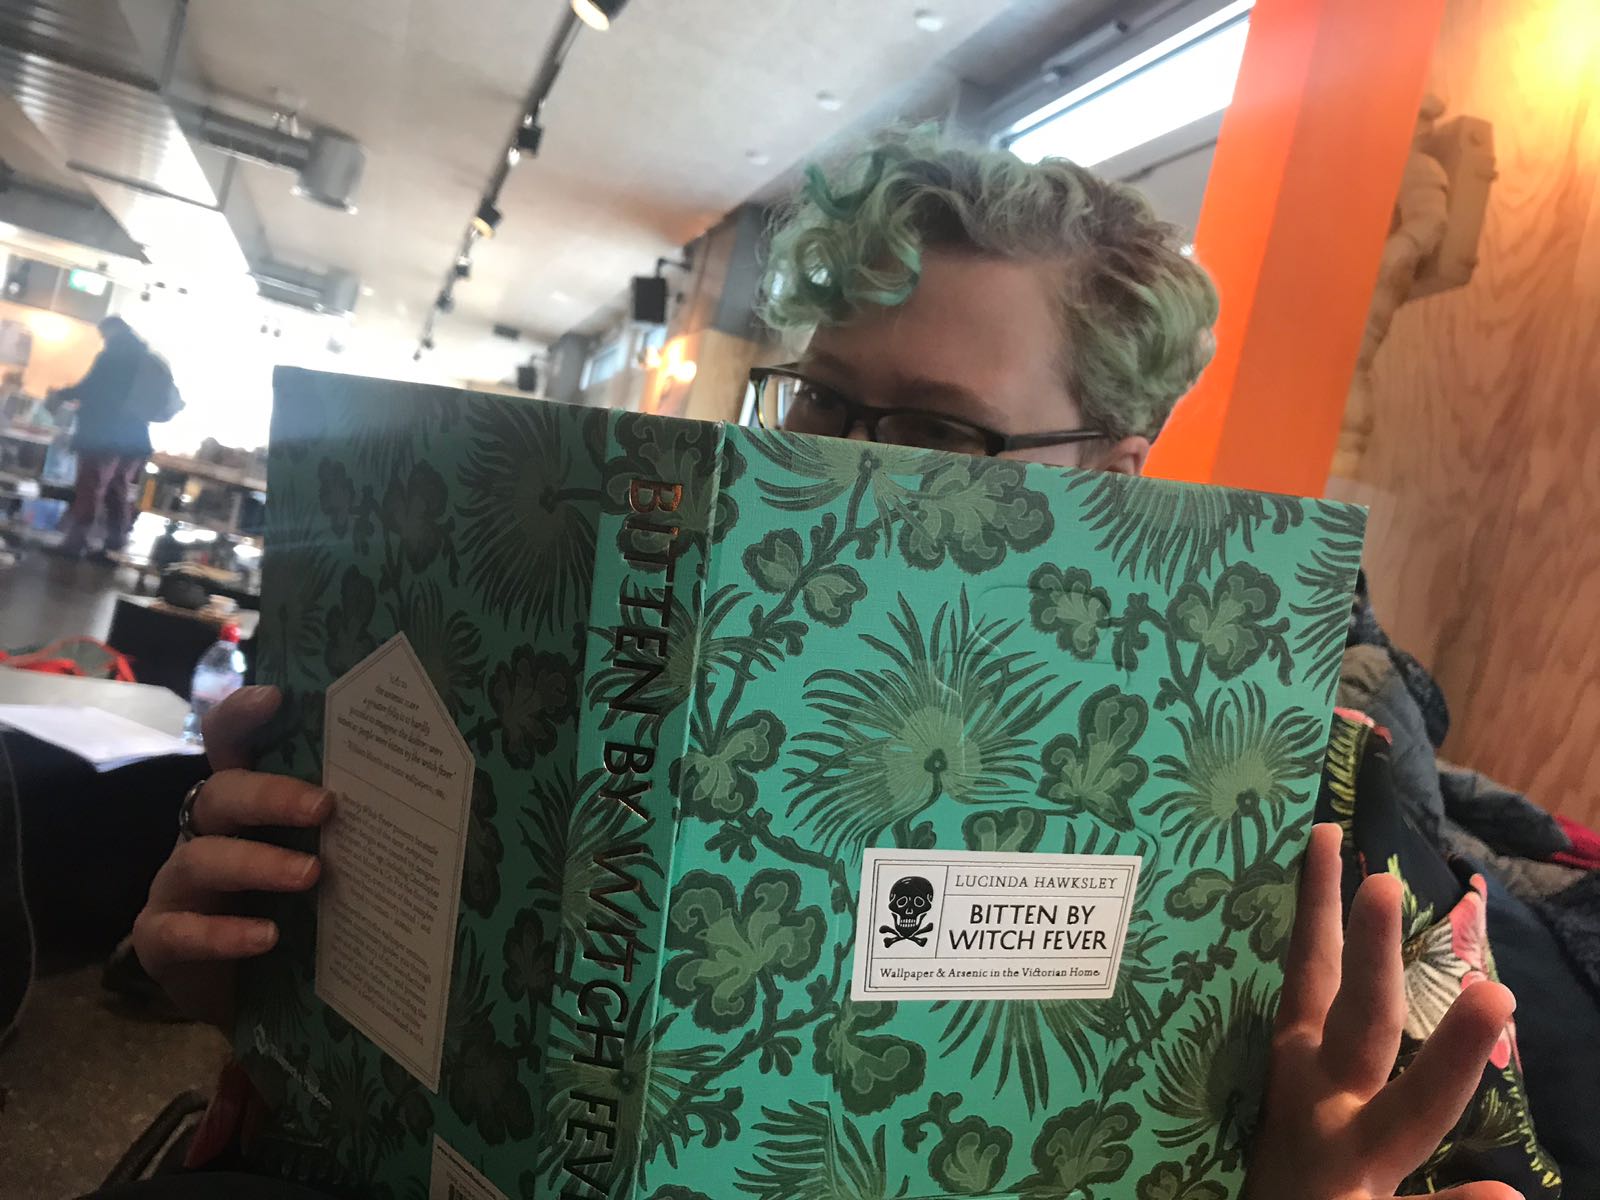 A person with curly green hair, reading a book with a green, flowery cover.